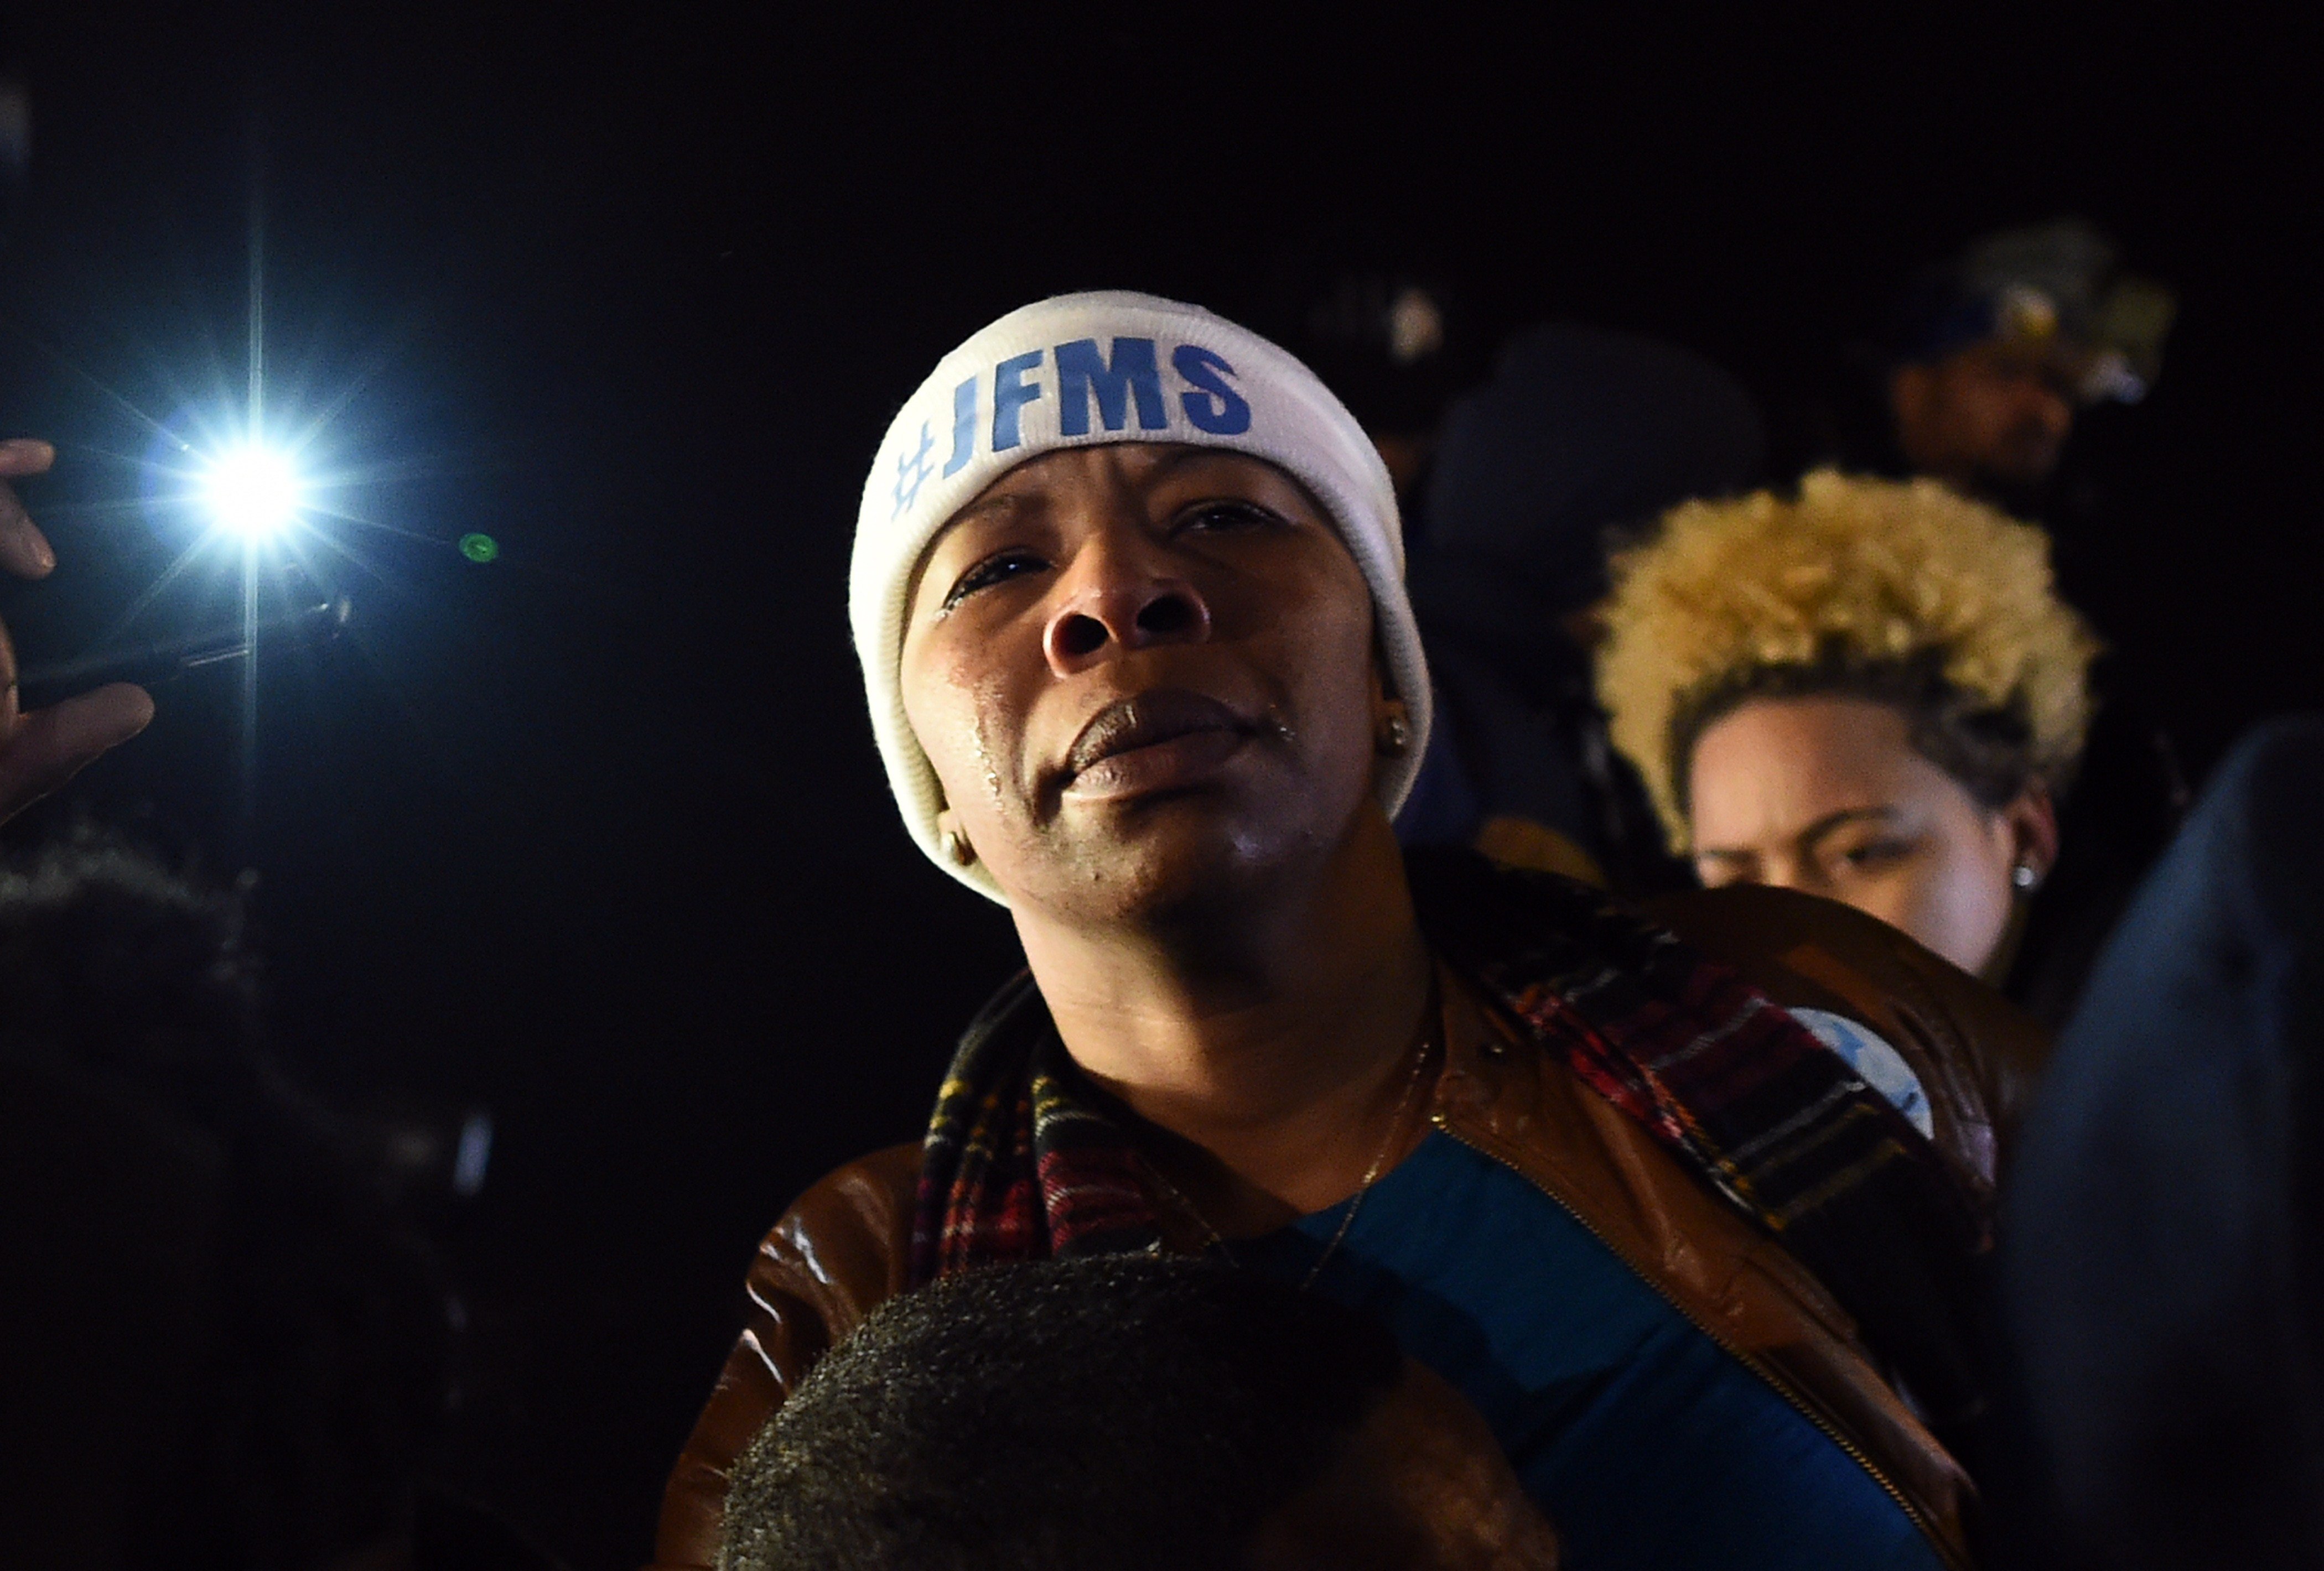 Michael Brown's mother Lesley McSpadden cries outside the police station in Ferguson, Mo. on Nov. 24, 2014 after hearing the grand jury decision on her son's fatal shooting.